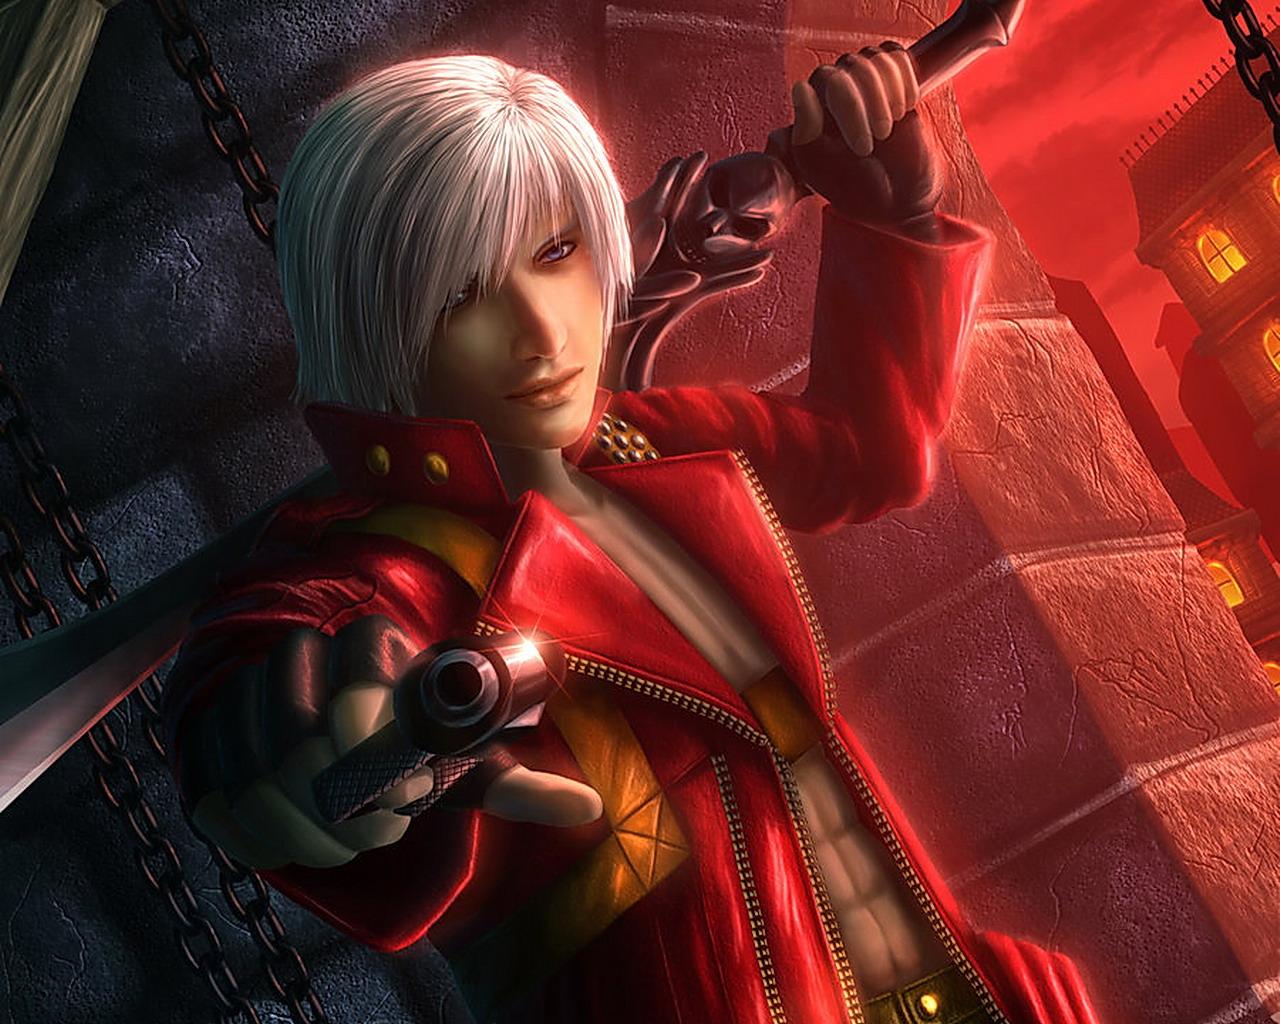 Wallpaper ID 432070  Video Game Devil May Cry 5 Phone Wallpaper Dante  Devil May Cry 750x1334 free download